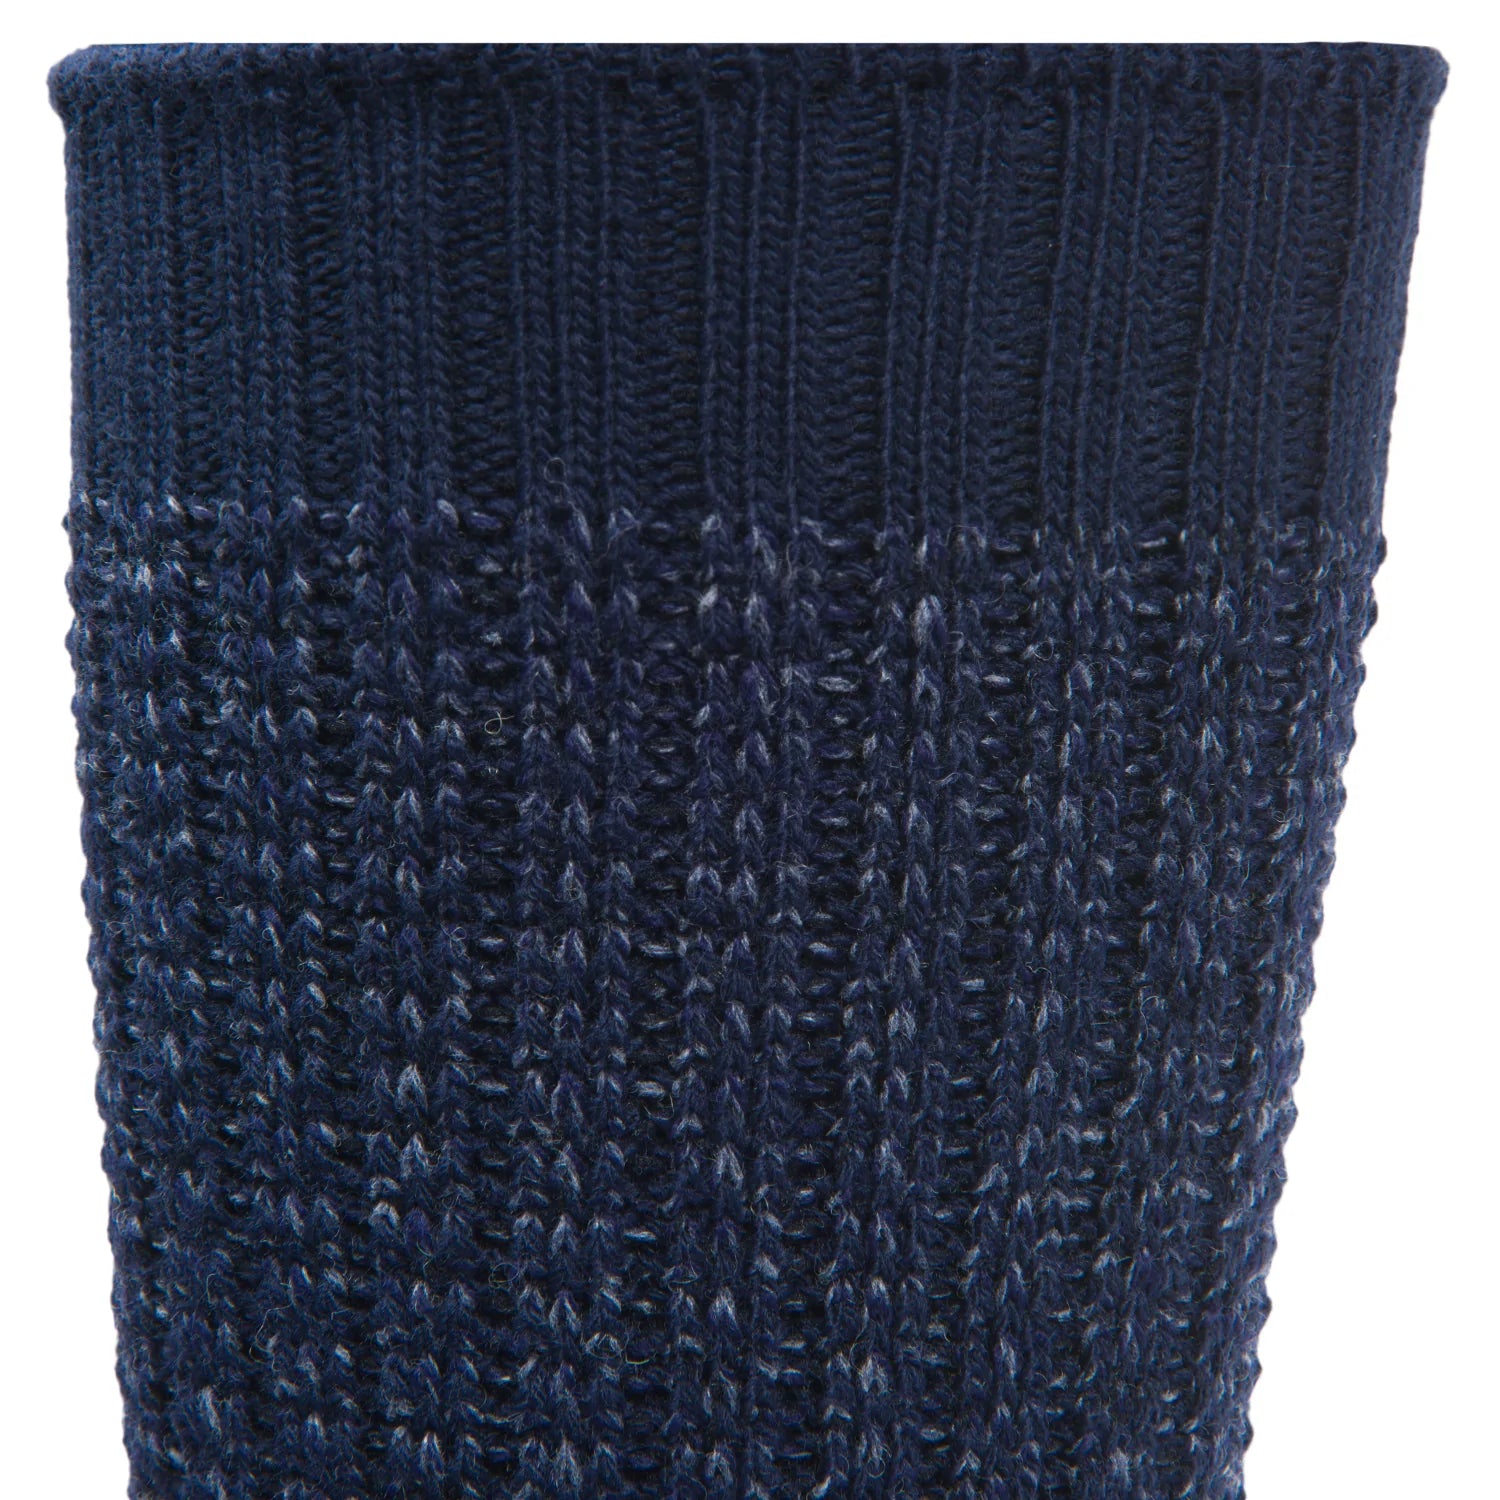 Pointe Lightweight Crew Sock - Navy II cuff perspective - made in The USA Wigwam Socks